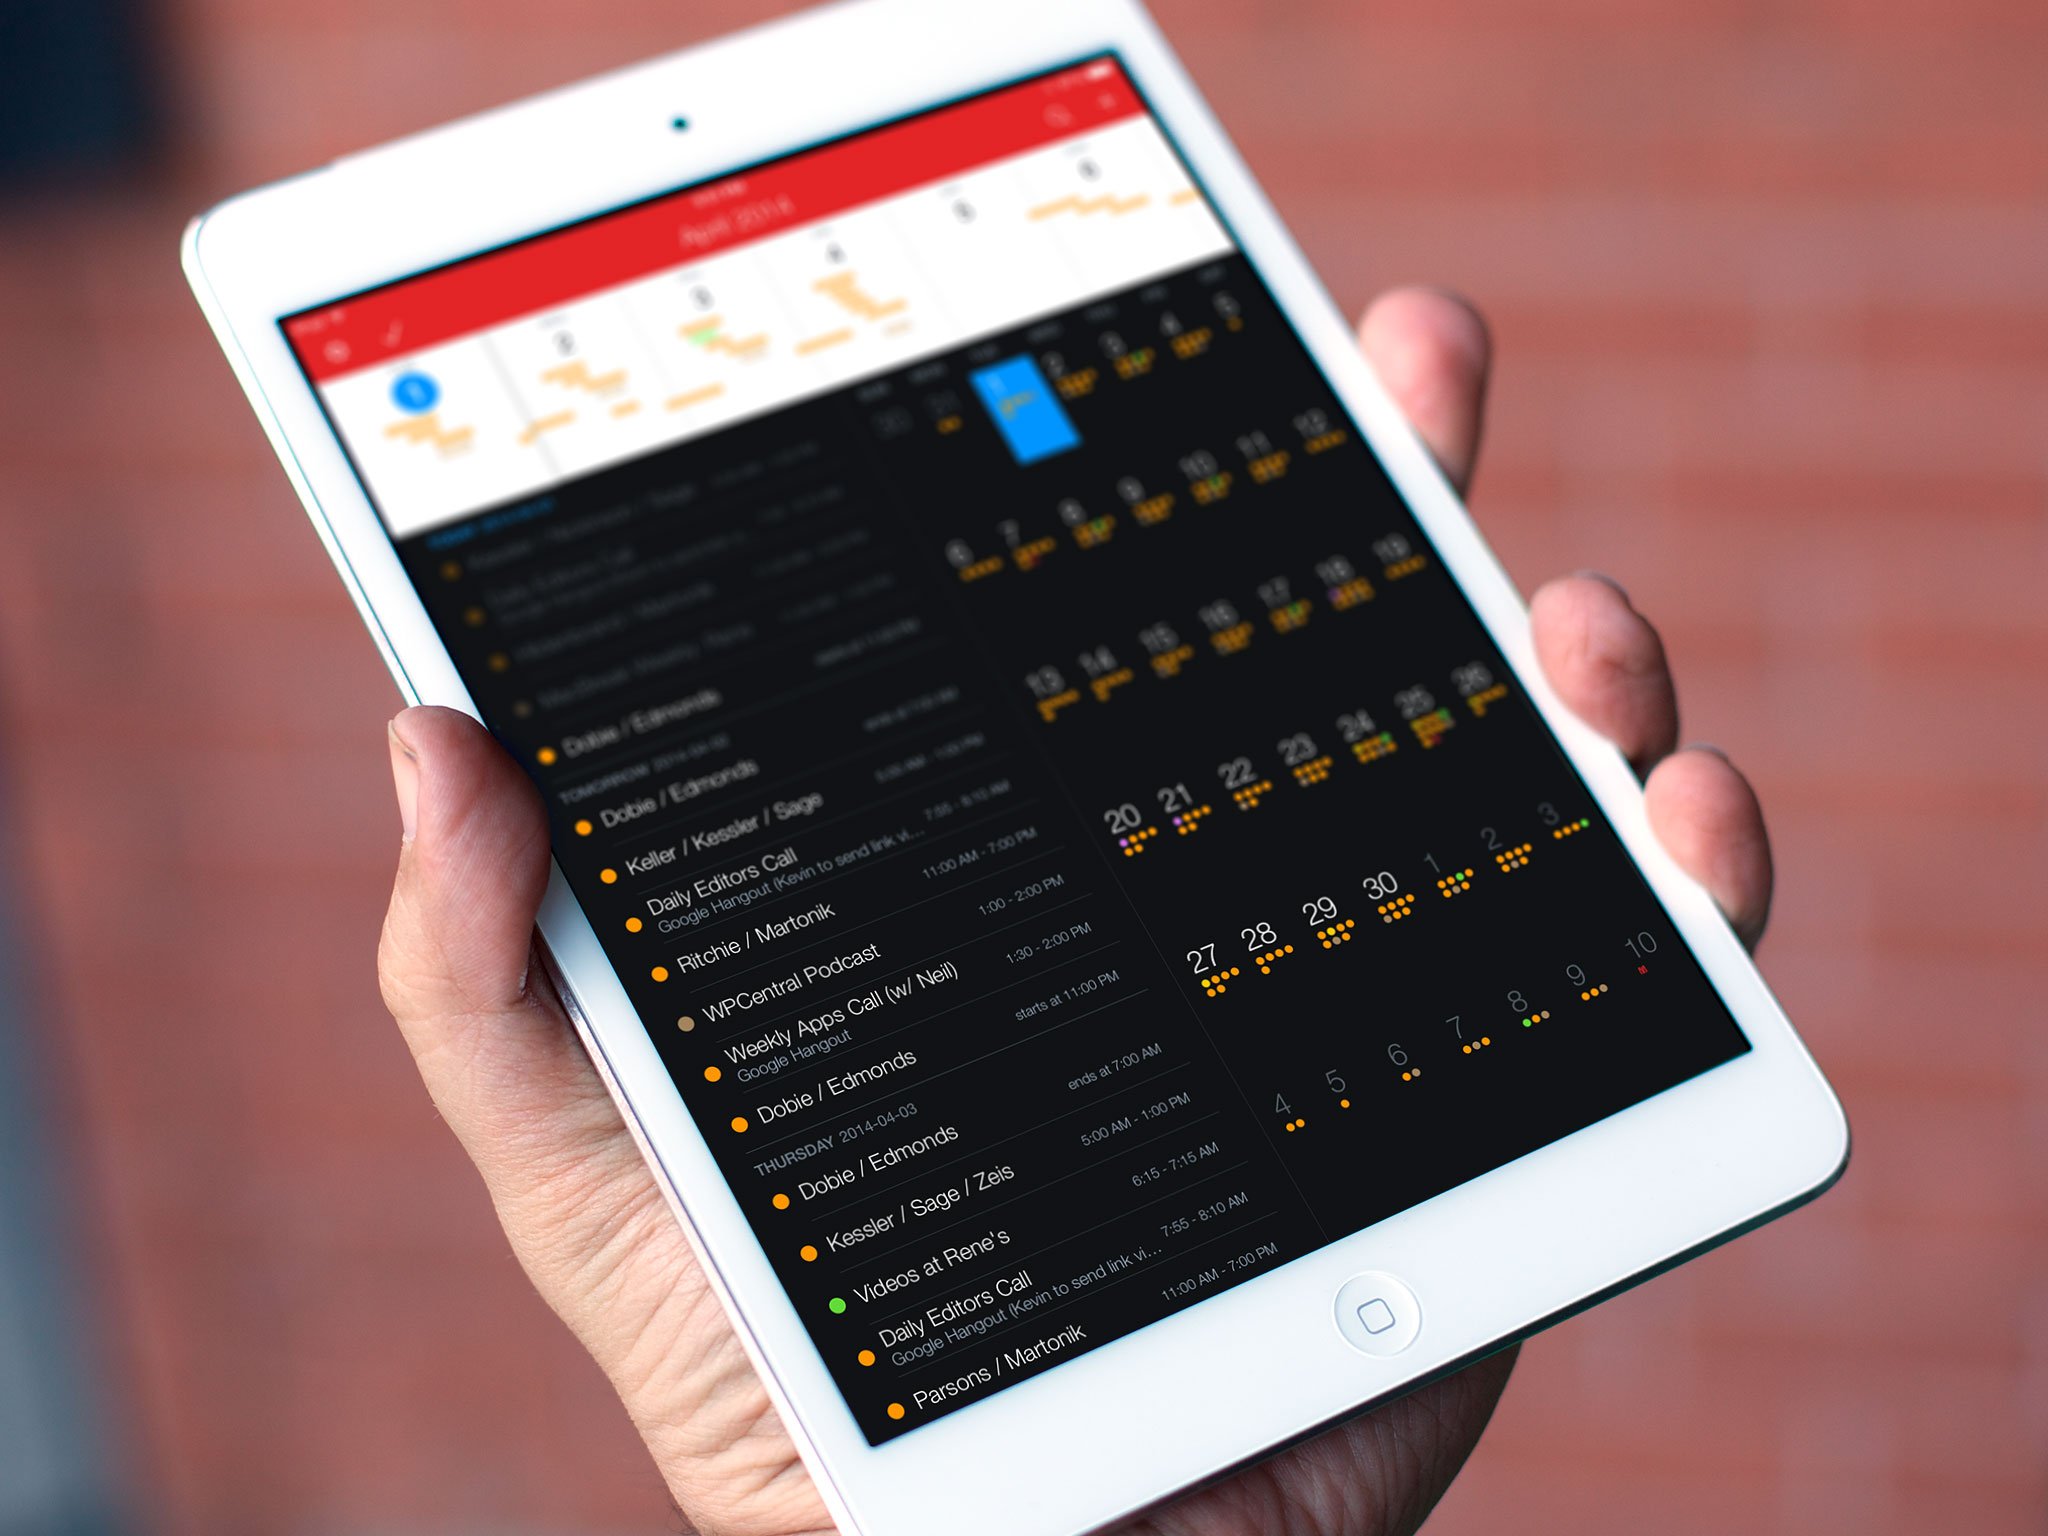 Fantastical 2 for iPad review